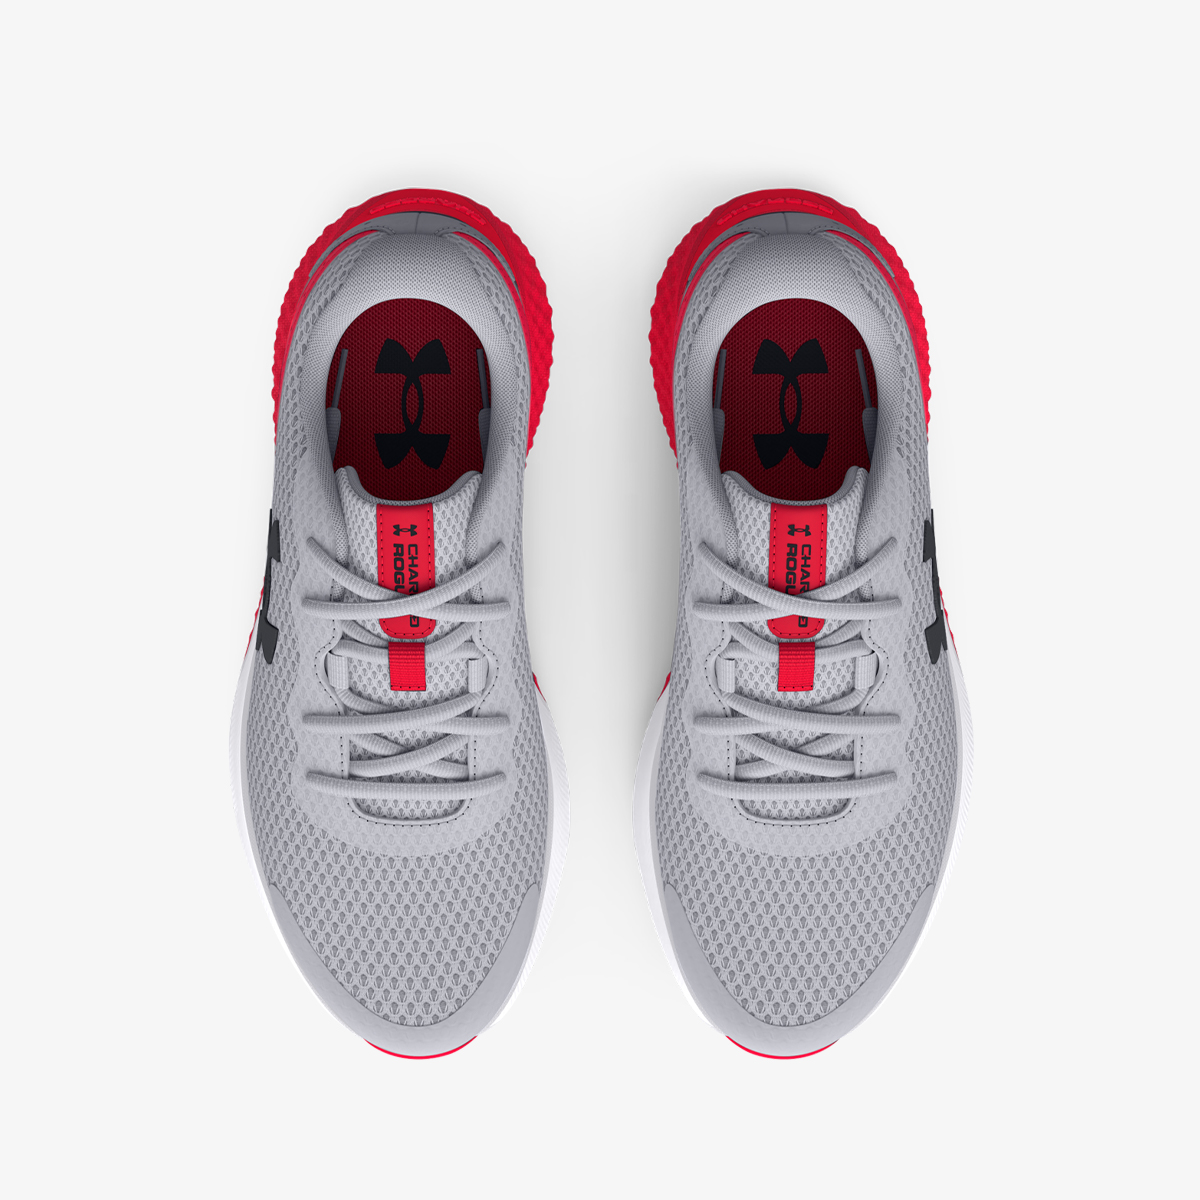 Under Armour Charged Rogue 3 